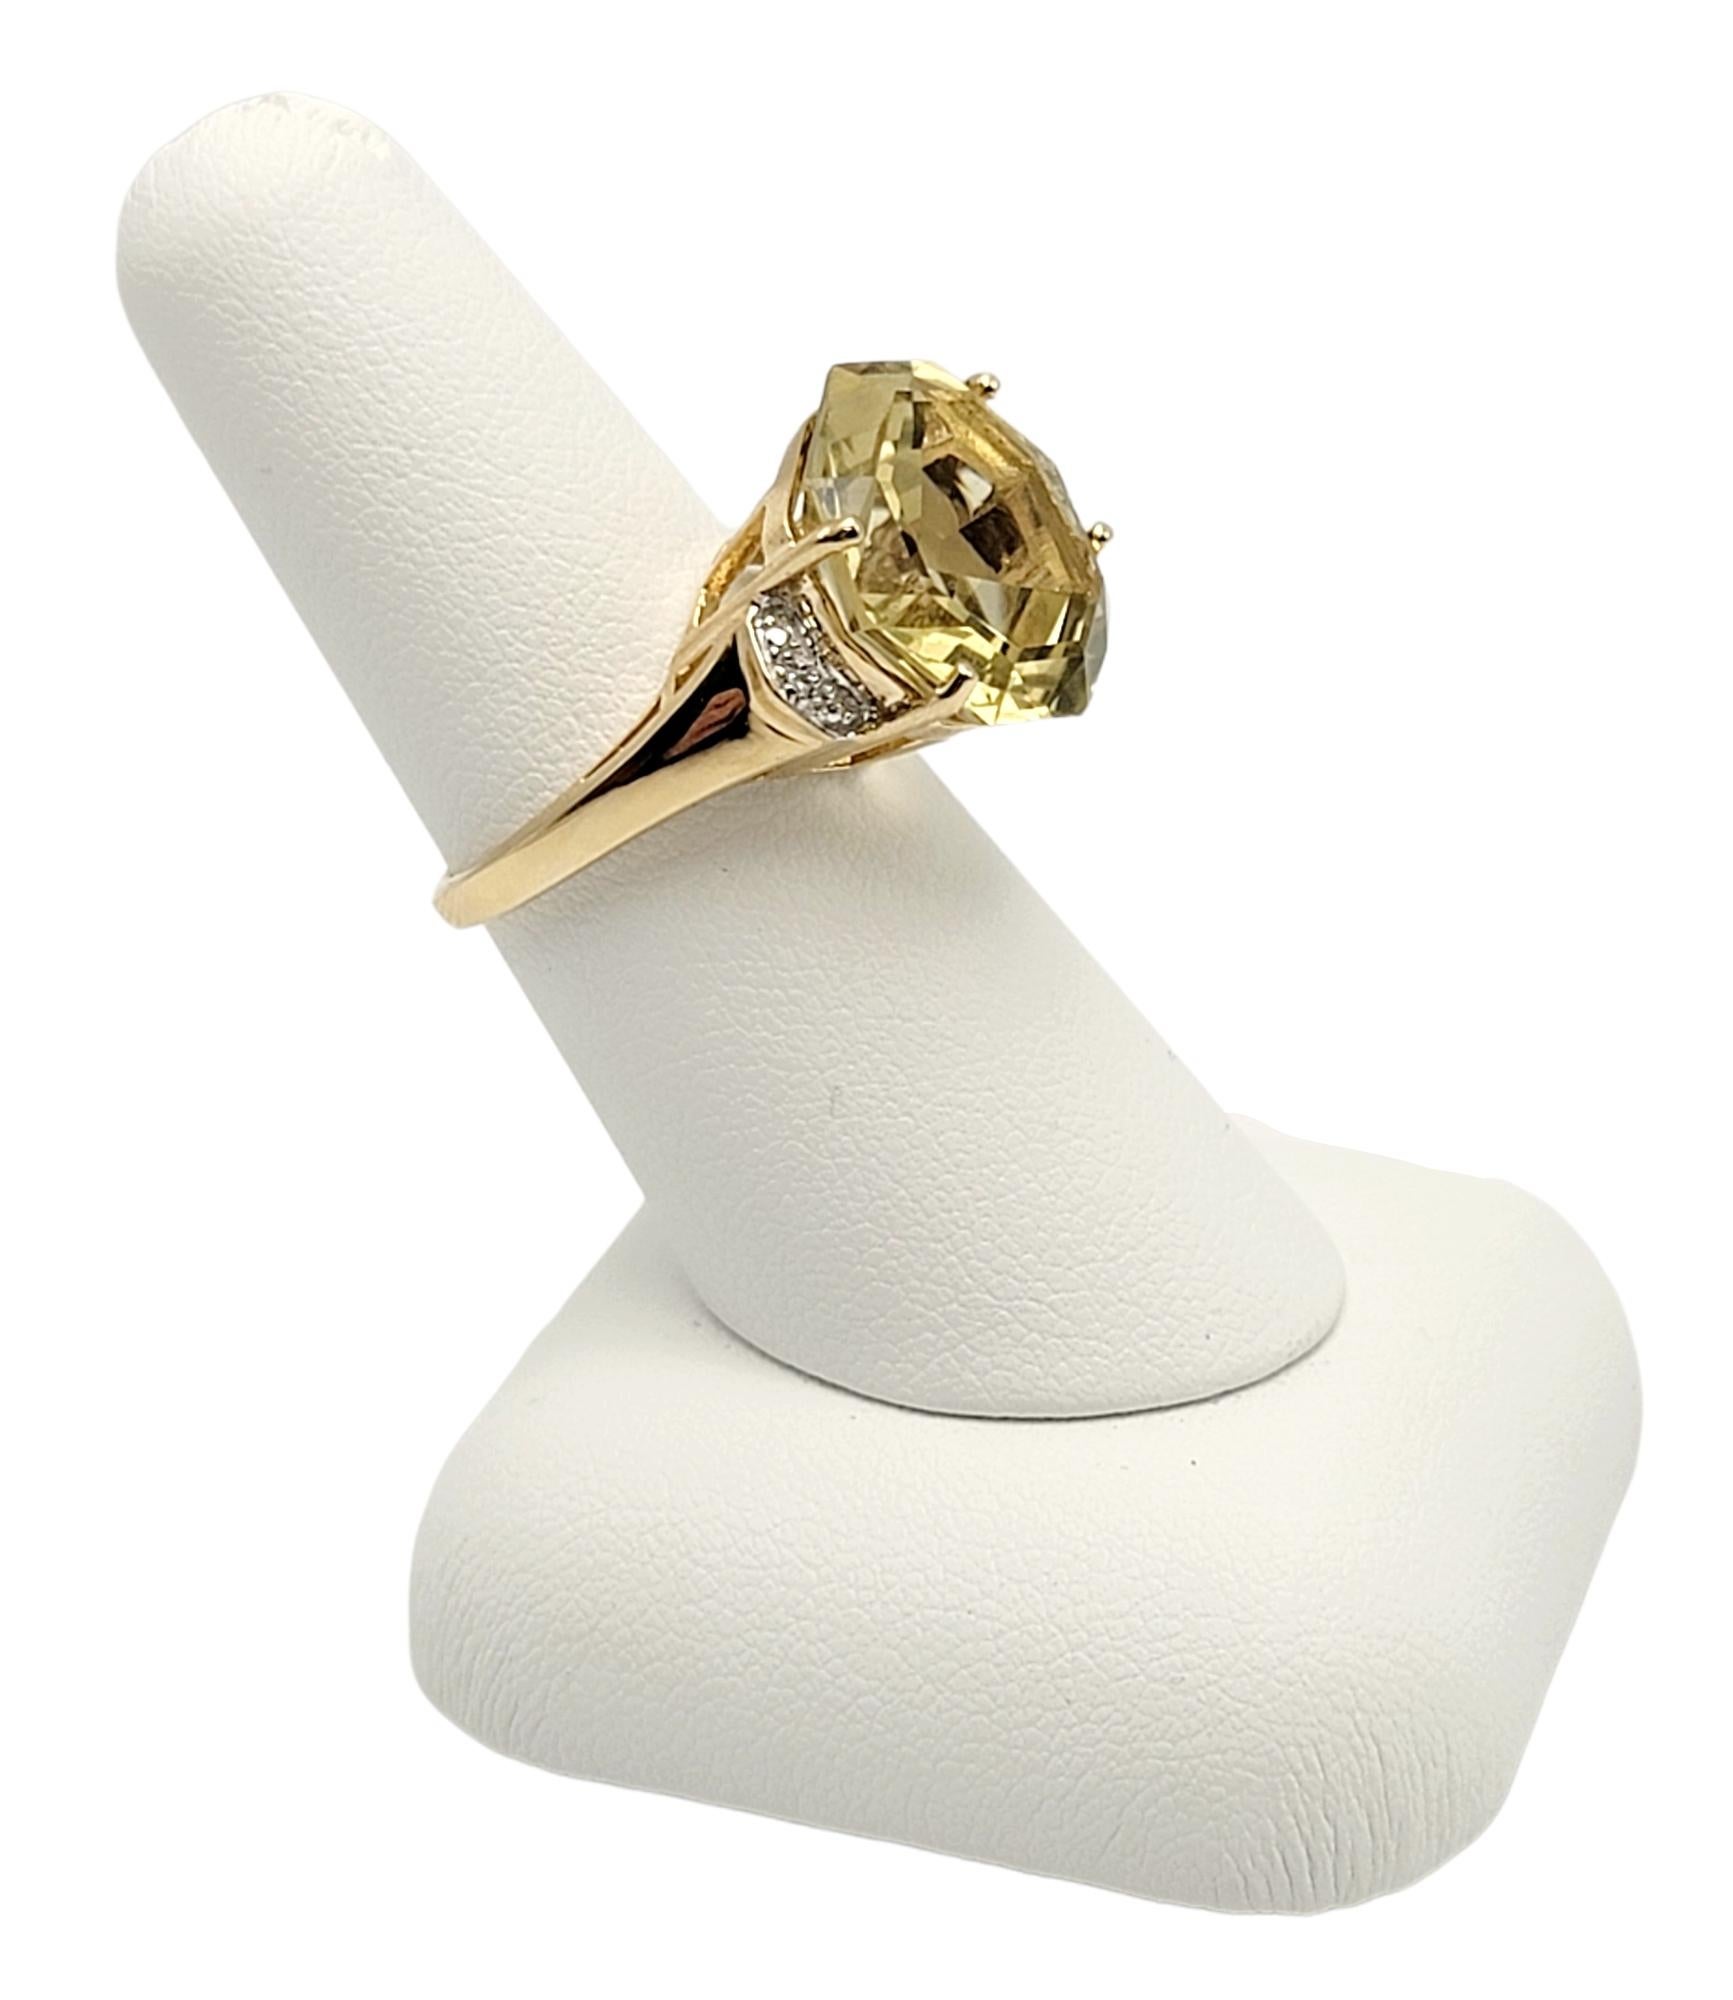 11.55 Carat Octagonal Cut Citrine Solitaire Cocktail Ring with Diamond Accents For Sale 1